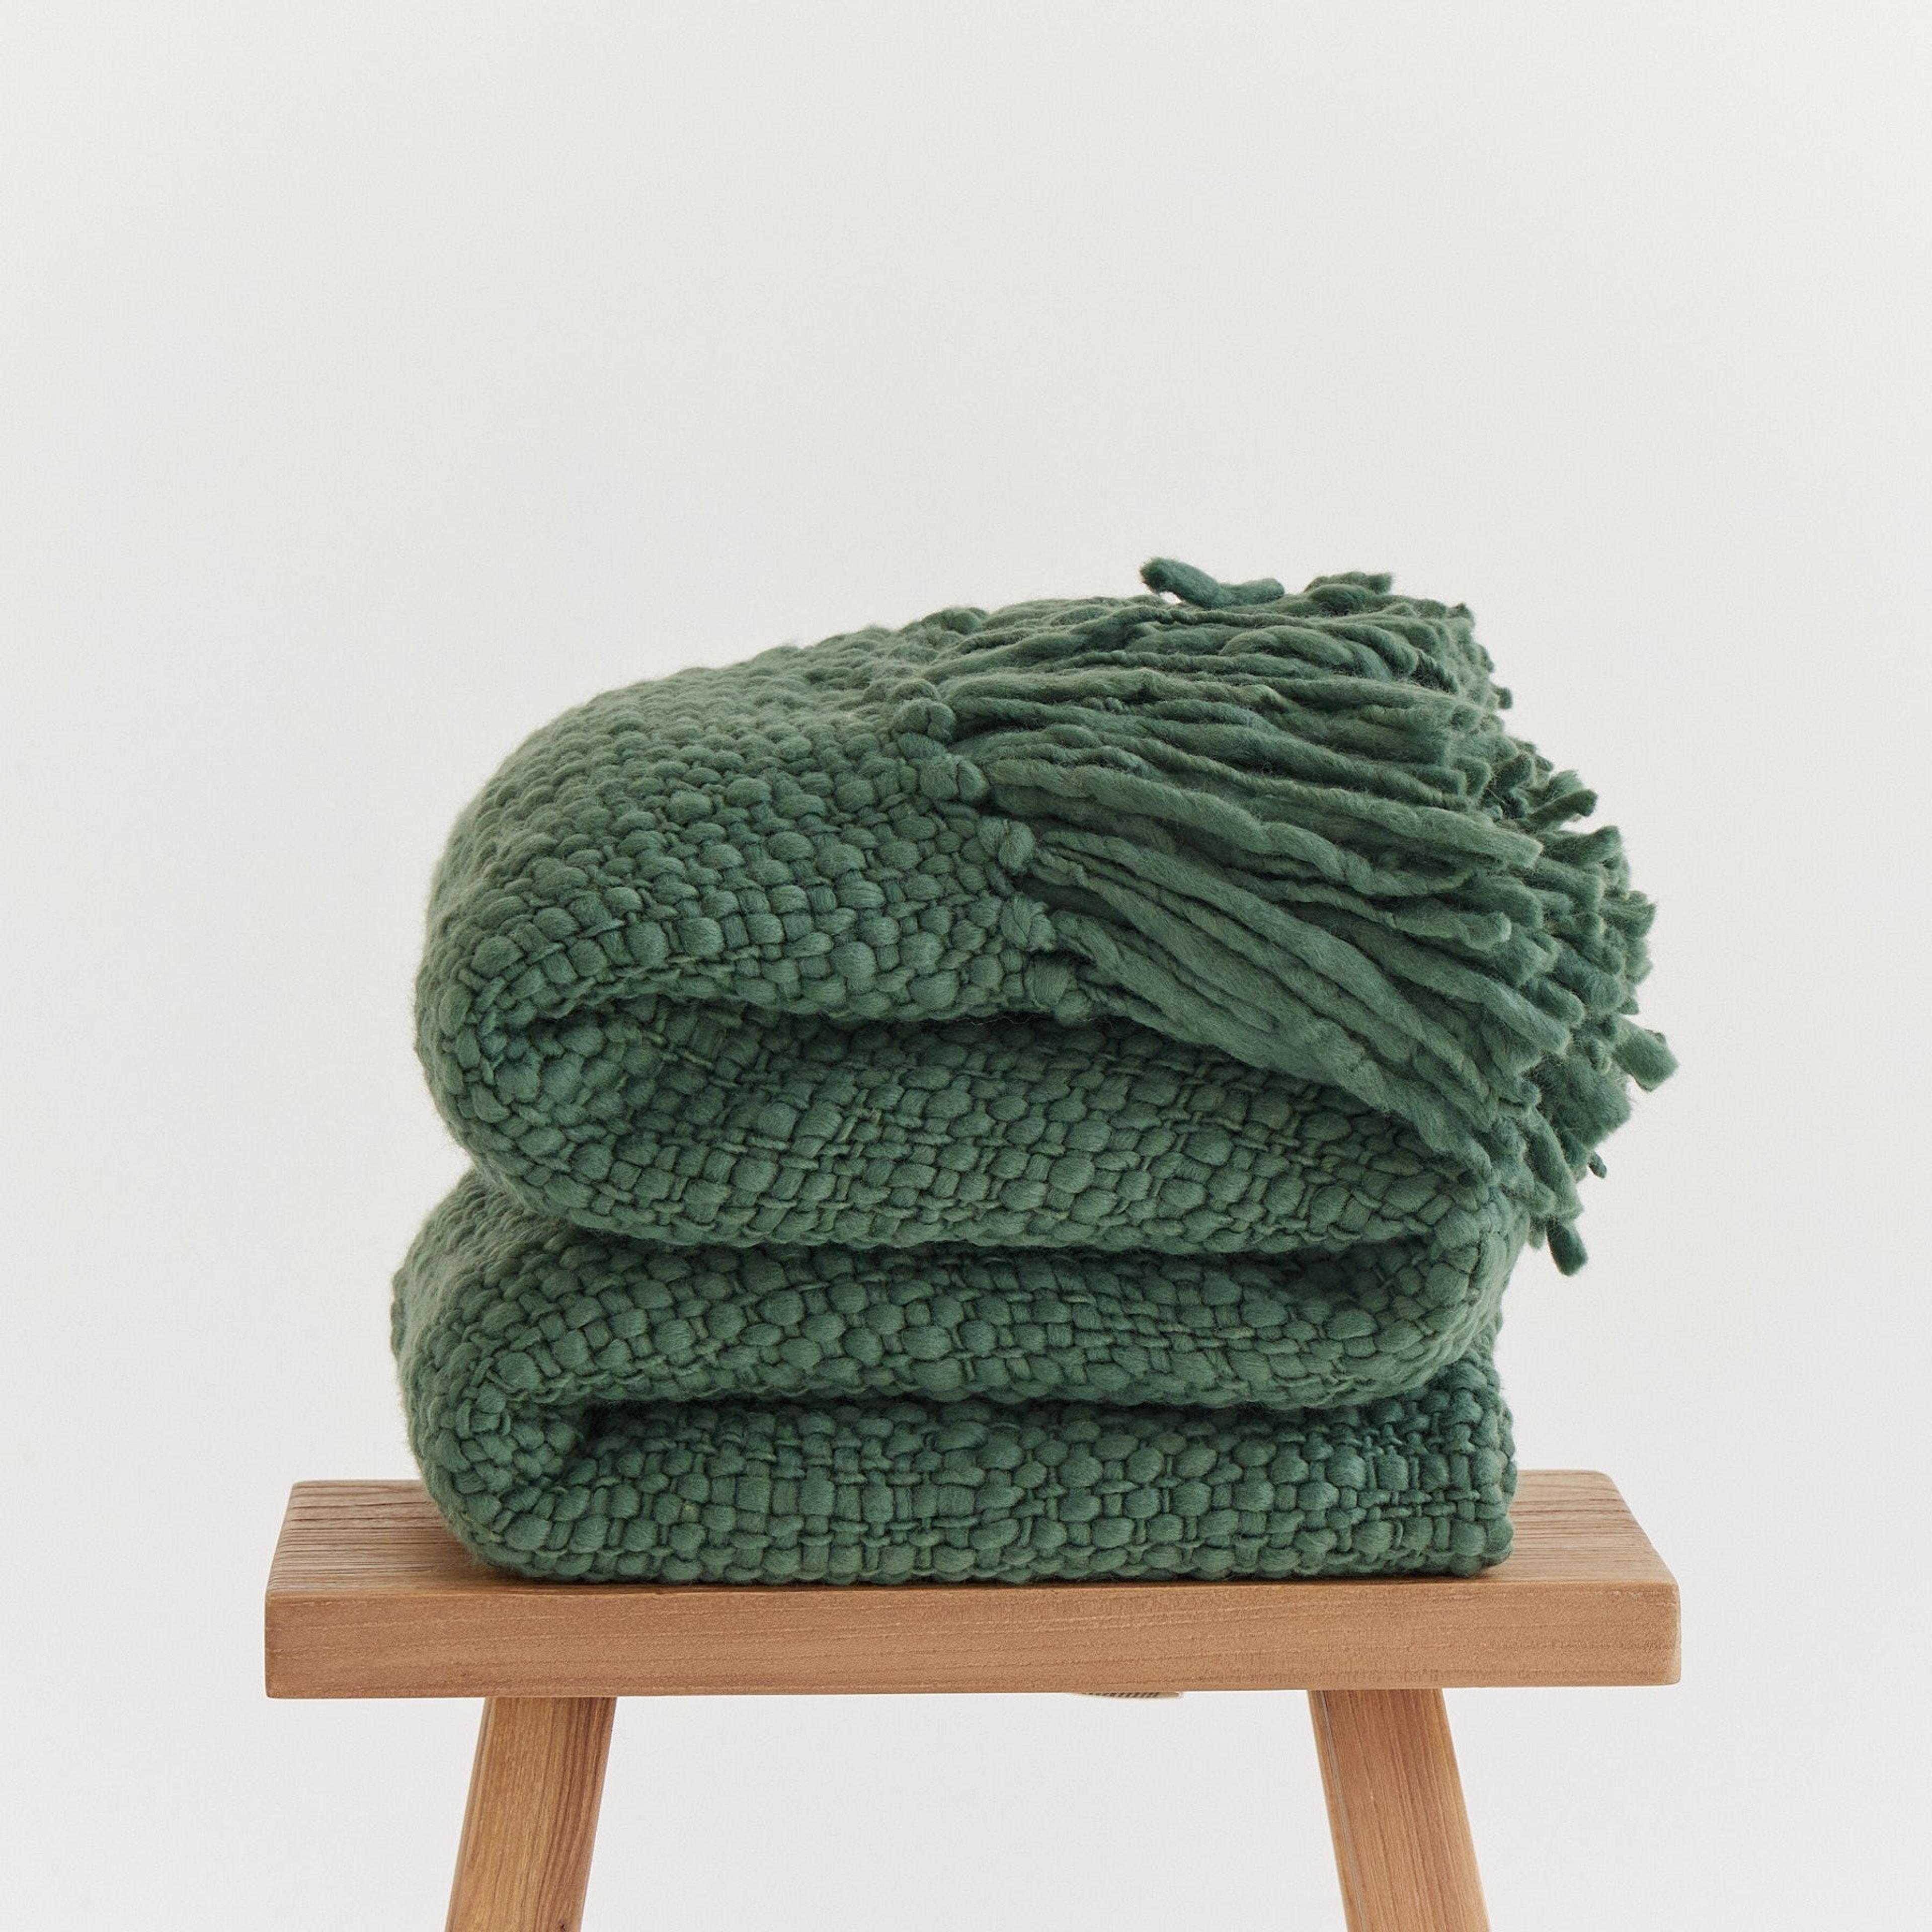 Luxurious Olive Green Wool Blanket - Handwoven with Merino Wool for Ultimate Comfort and Style